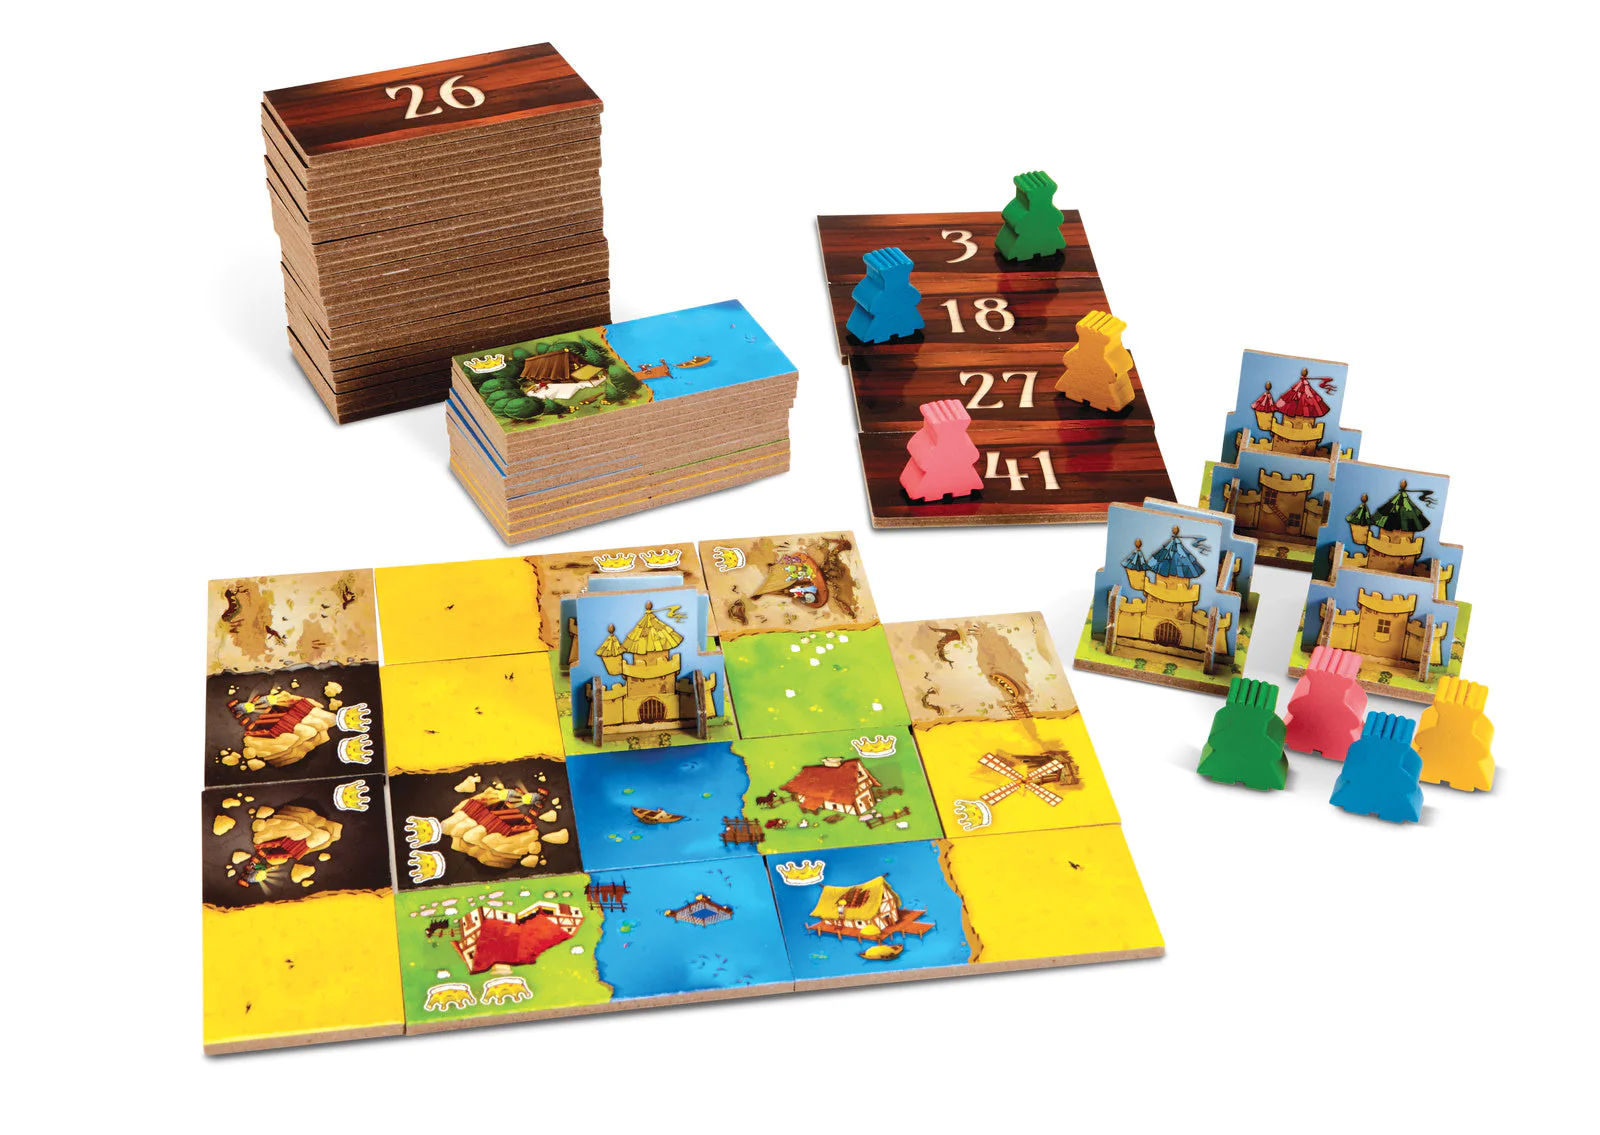 Kingdomino's components stack and tuck away nicely in its box, keeping the game's packaging to a minimum (Image: Kingdomino)